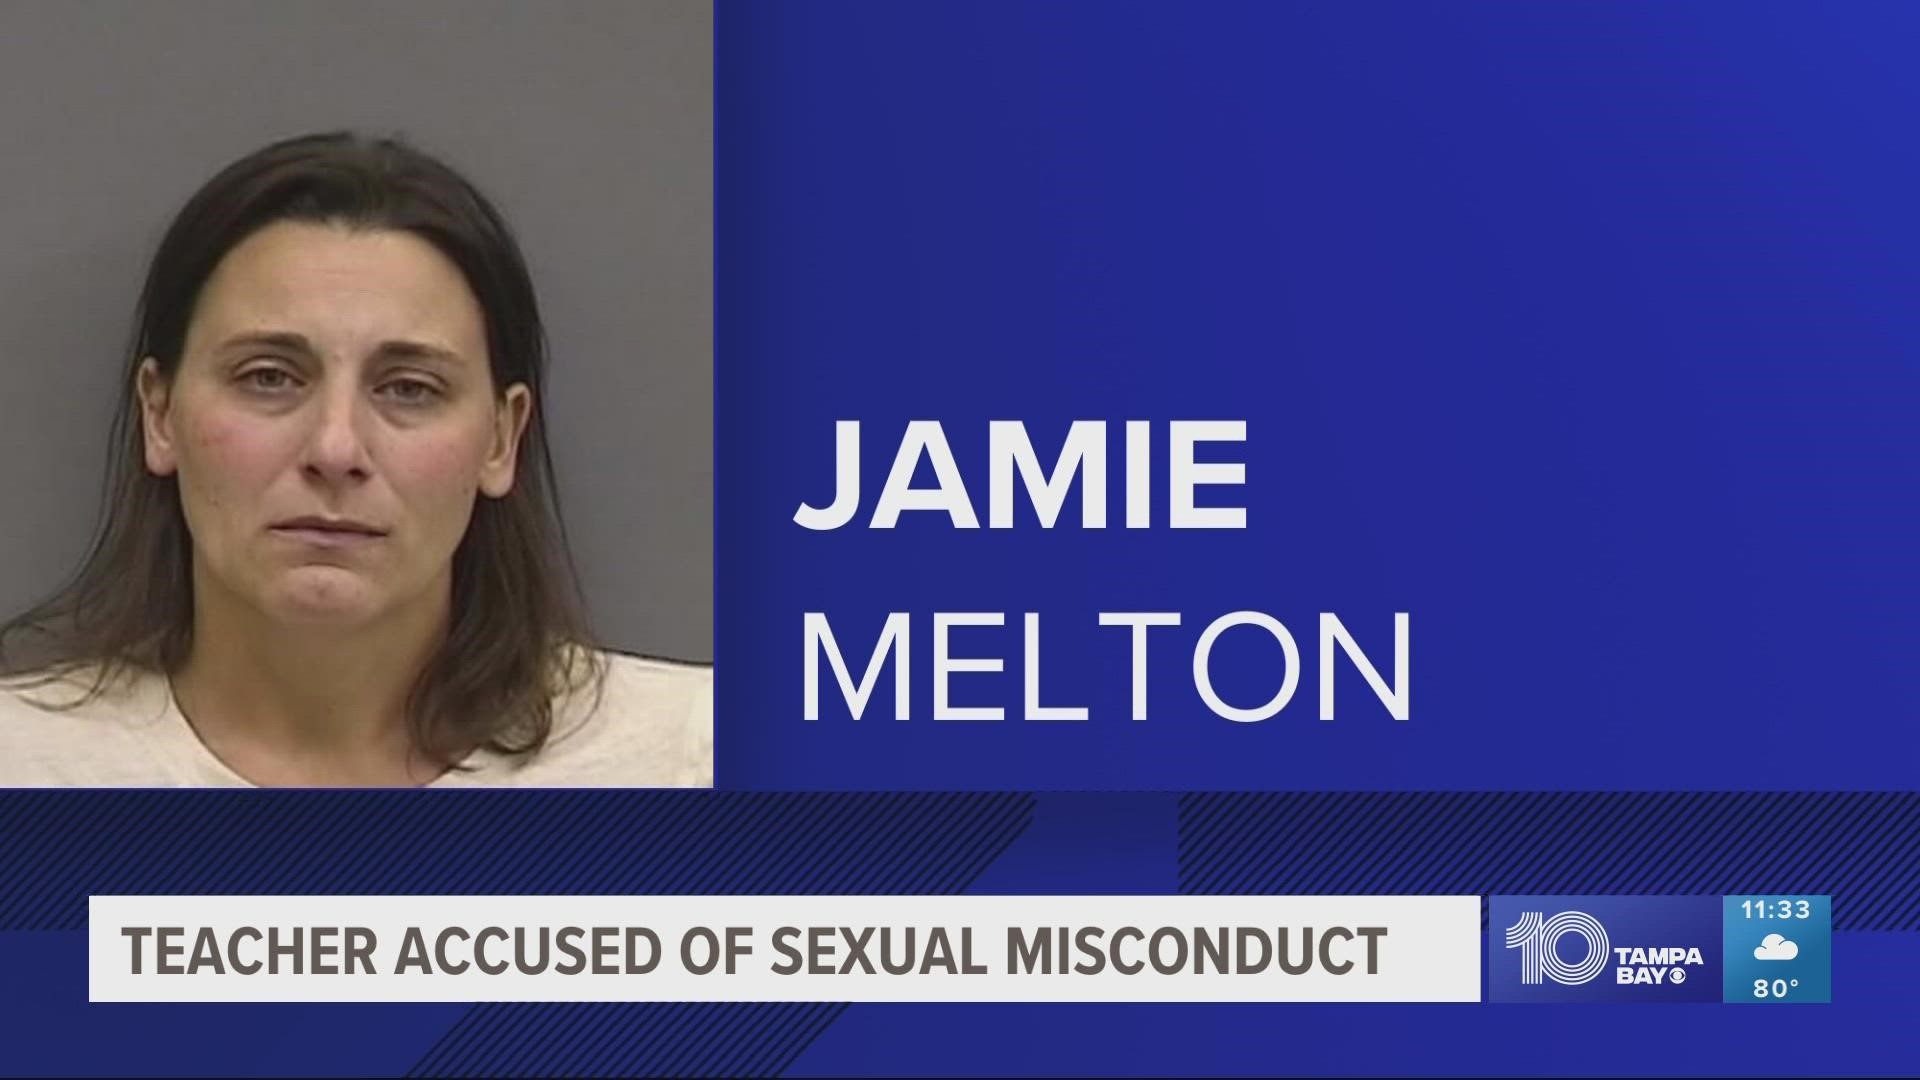 Jamie Melton was reportedly charged with sexual battery.